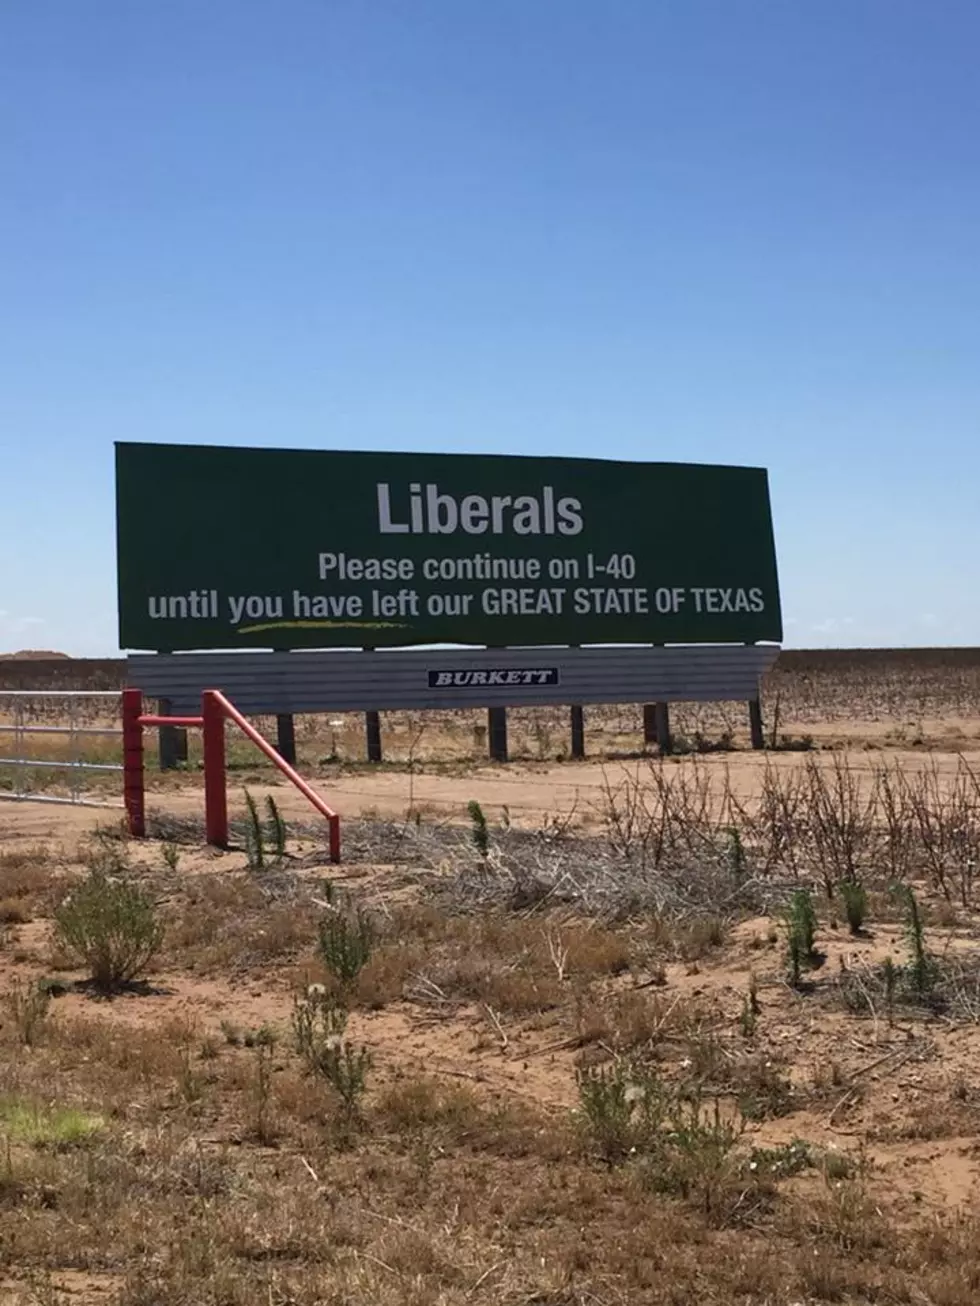 Texas Billboard Tells Liberals To Keep Driving Until They Leave the State